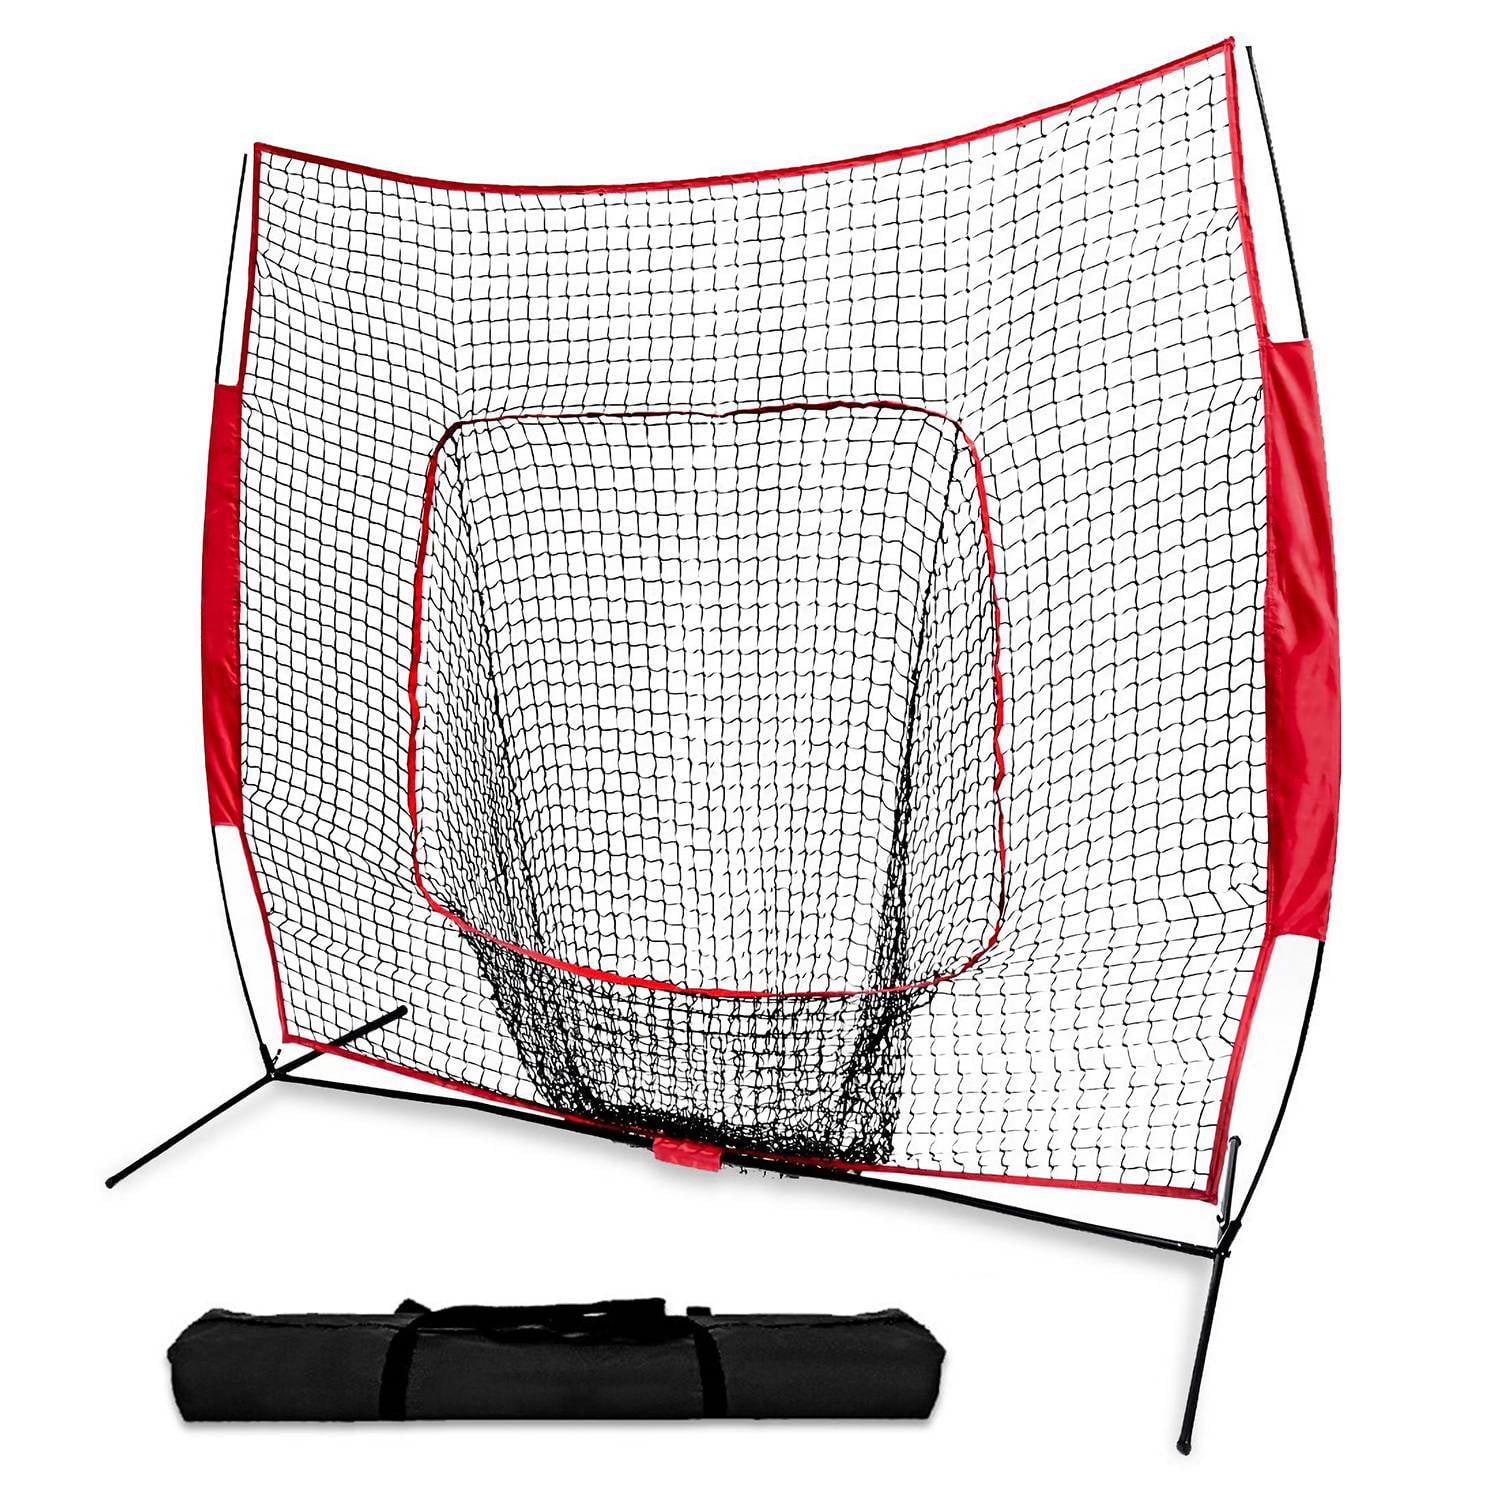 Training Equipment PowerNet Baseball Softball Practice Net 7x7 with Deluxe Tee Bow Frame Fielding Batting Training Aid | Practice Hitting Portable Backstop Pitching Sky Blue